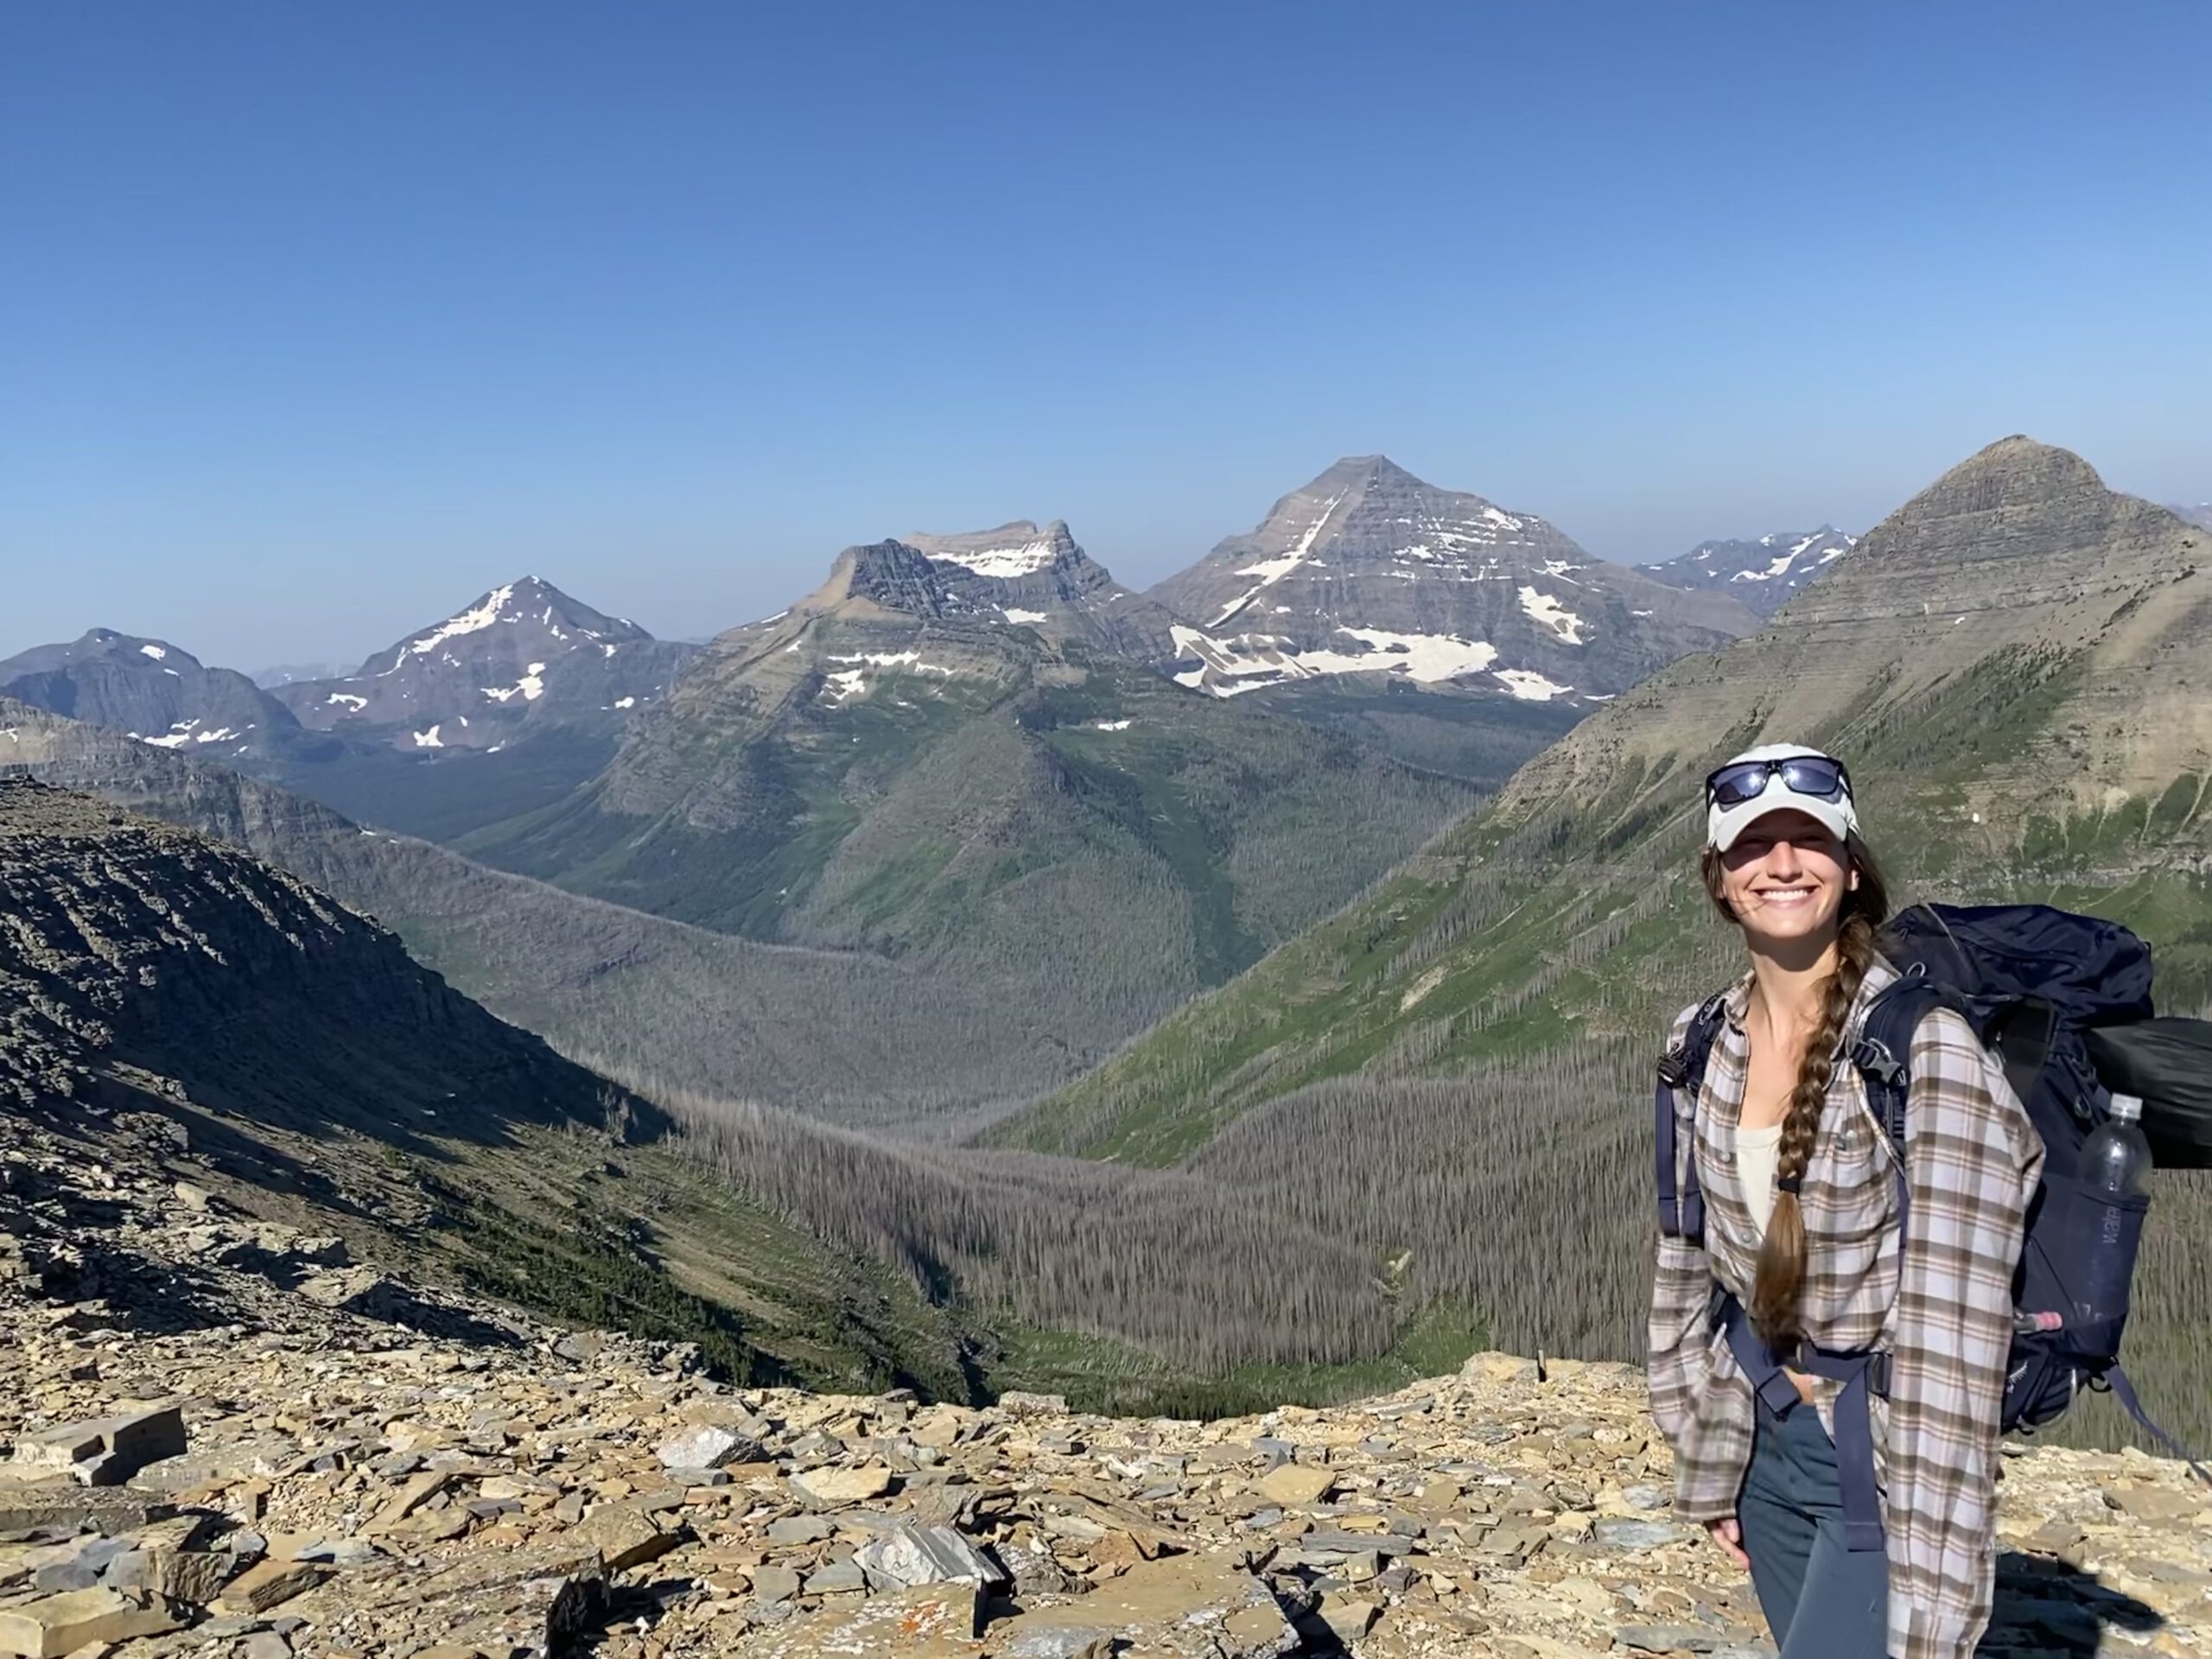 On a backpacking trip in Glacier National Park